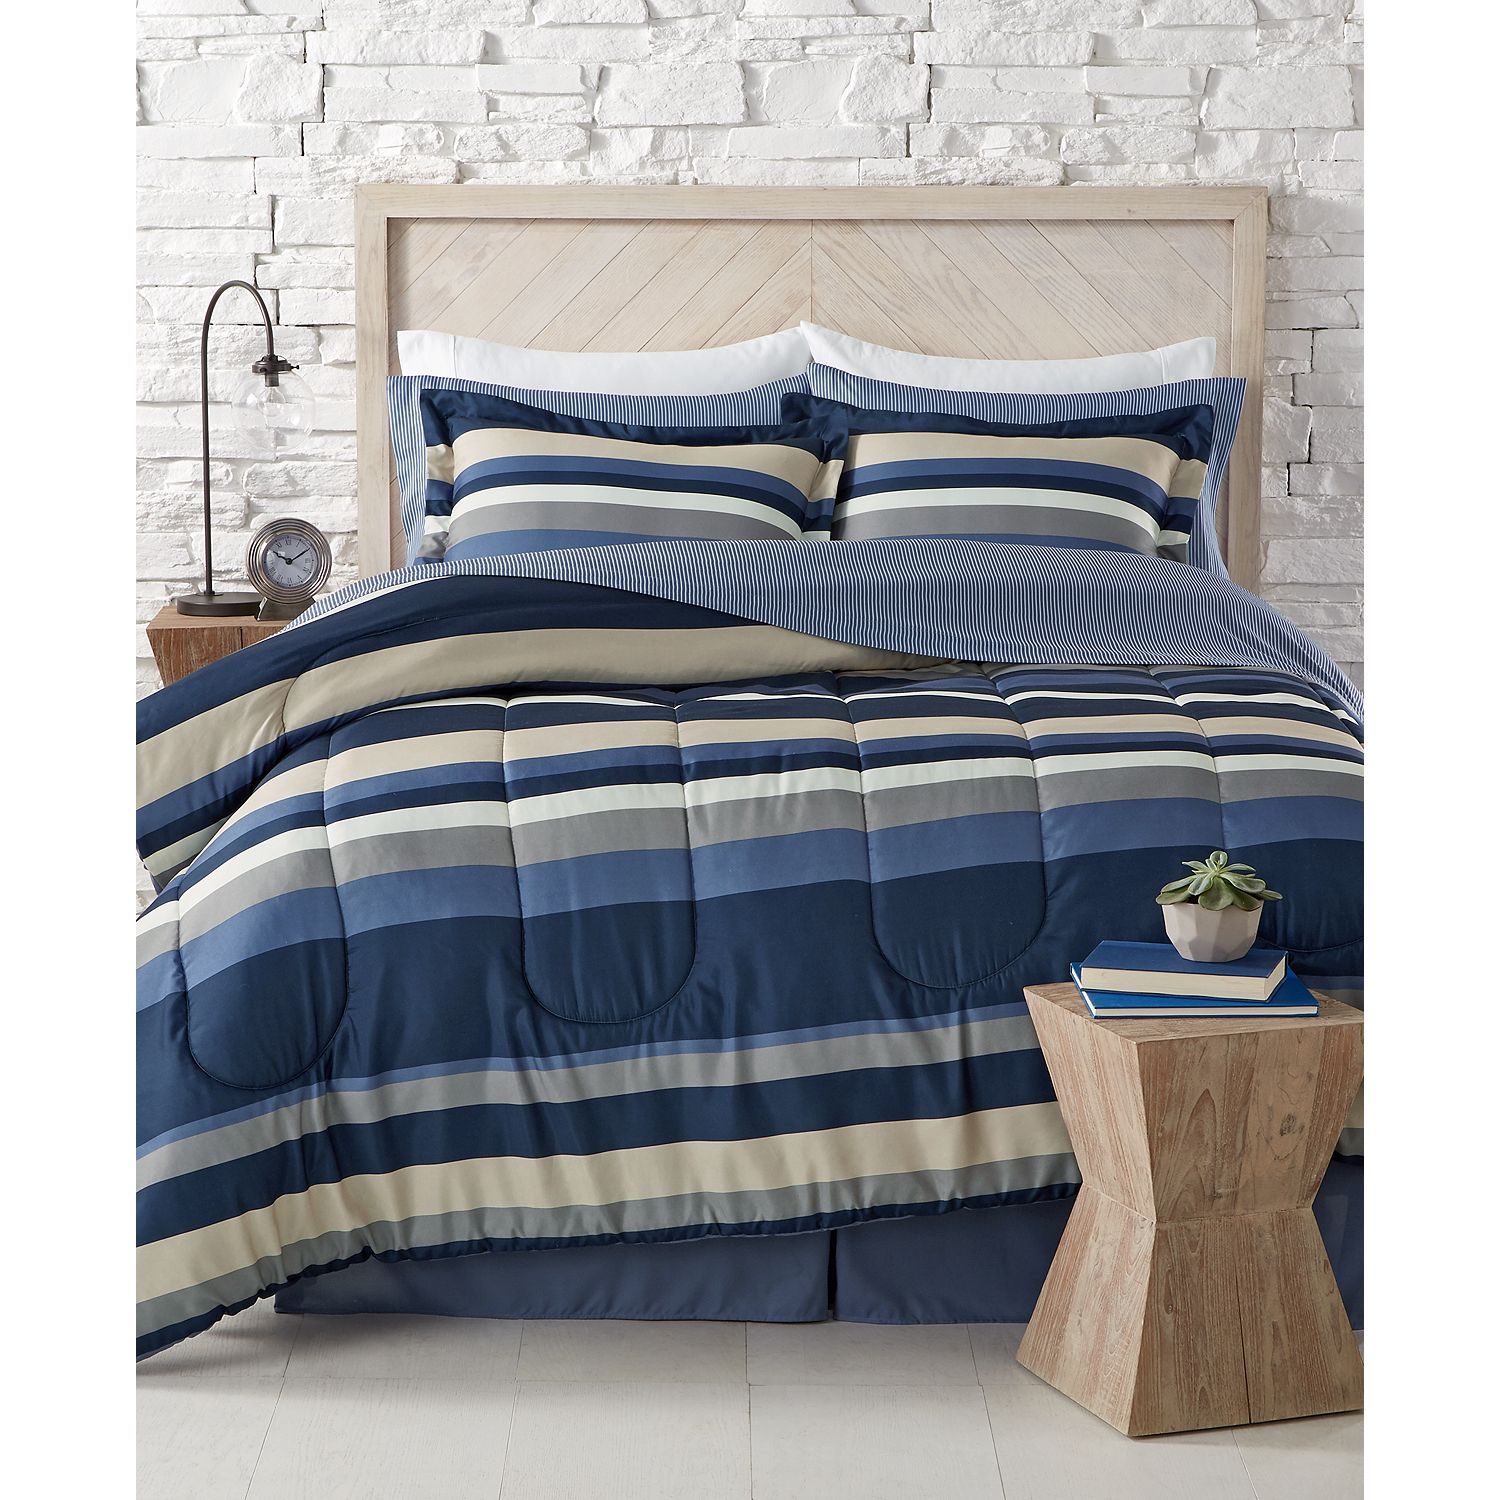 Austin Stripe/Solid Reversible 8 Pc. Comforter Set, Created for Macy's $40